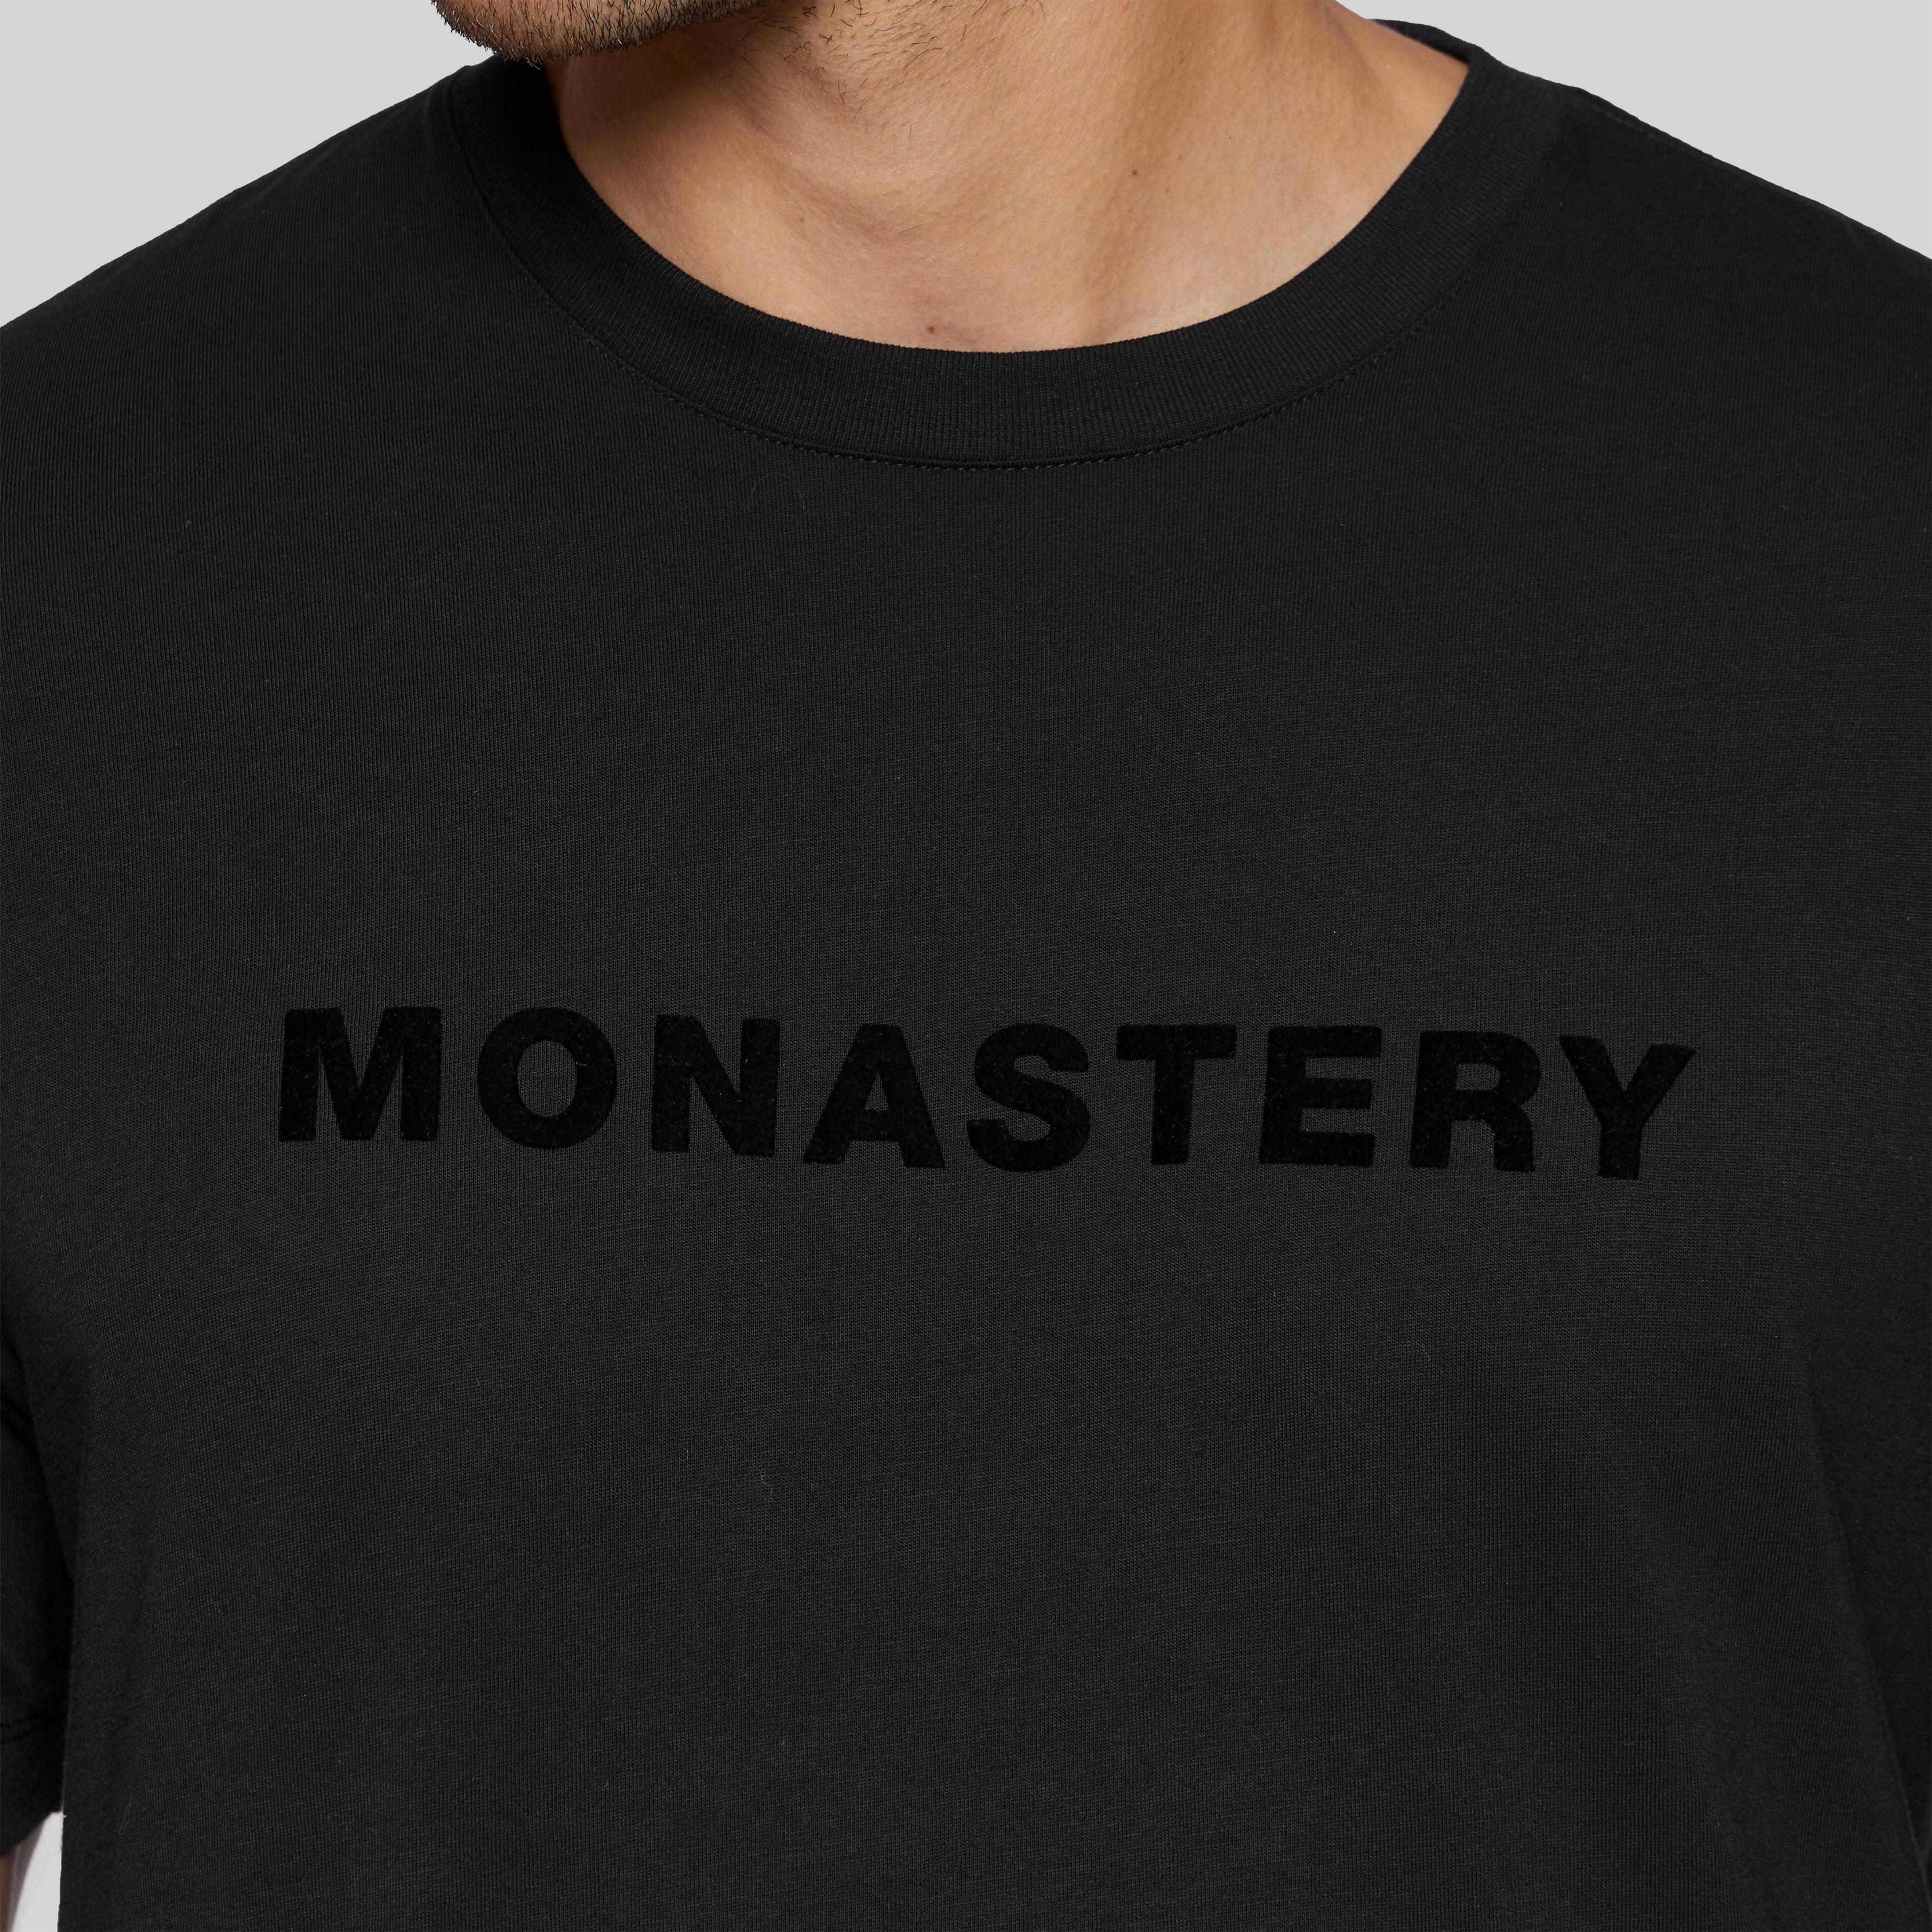 PERSEO BLACK T-SHIRT | Monastery Couture